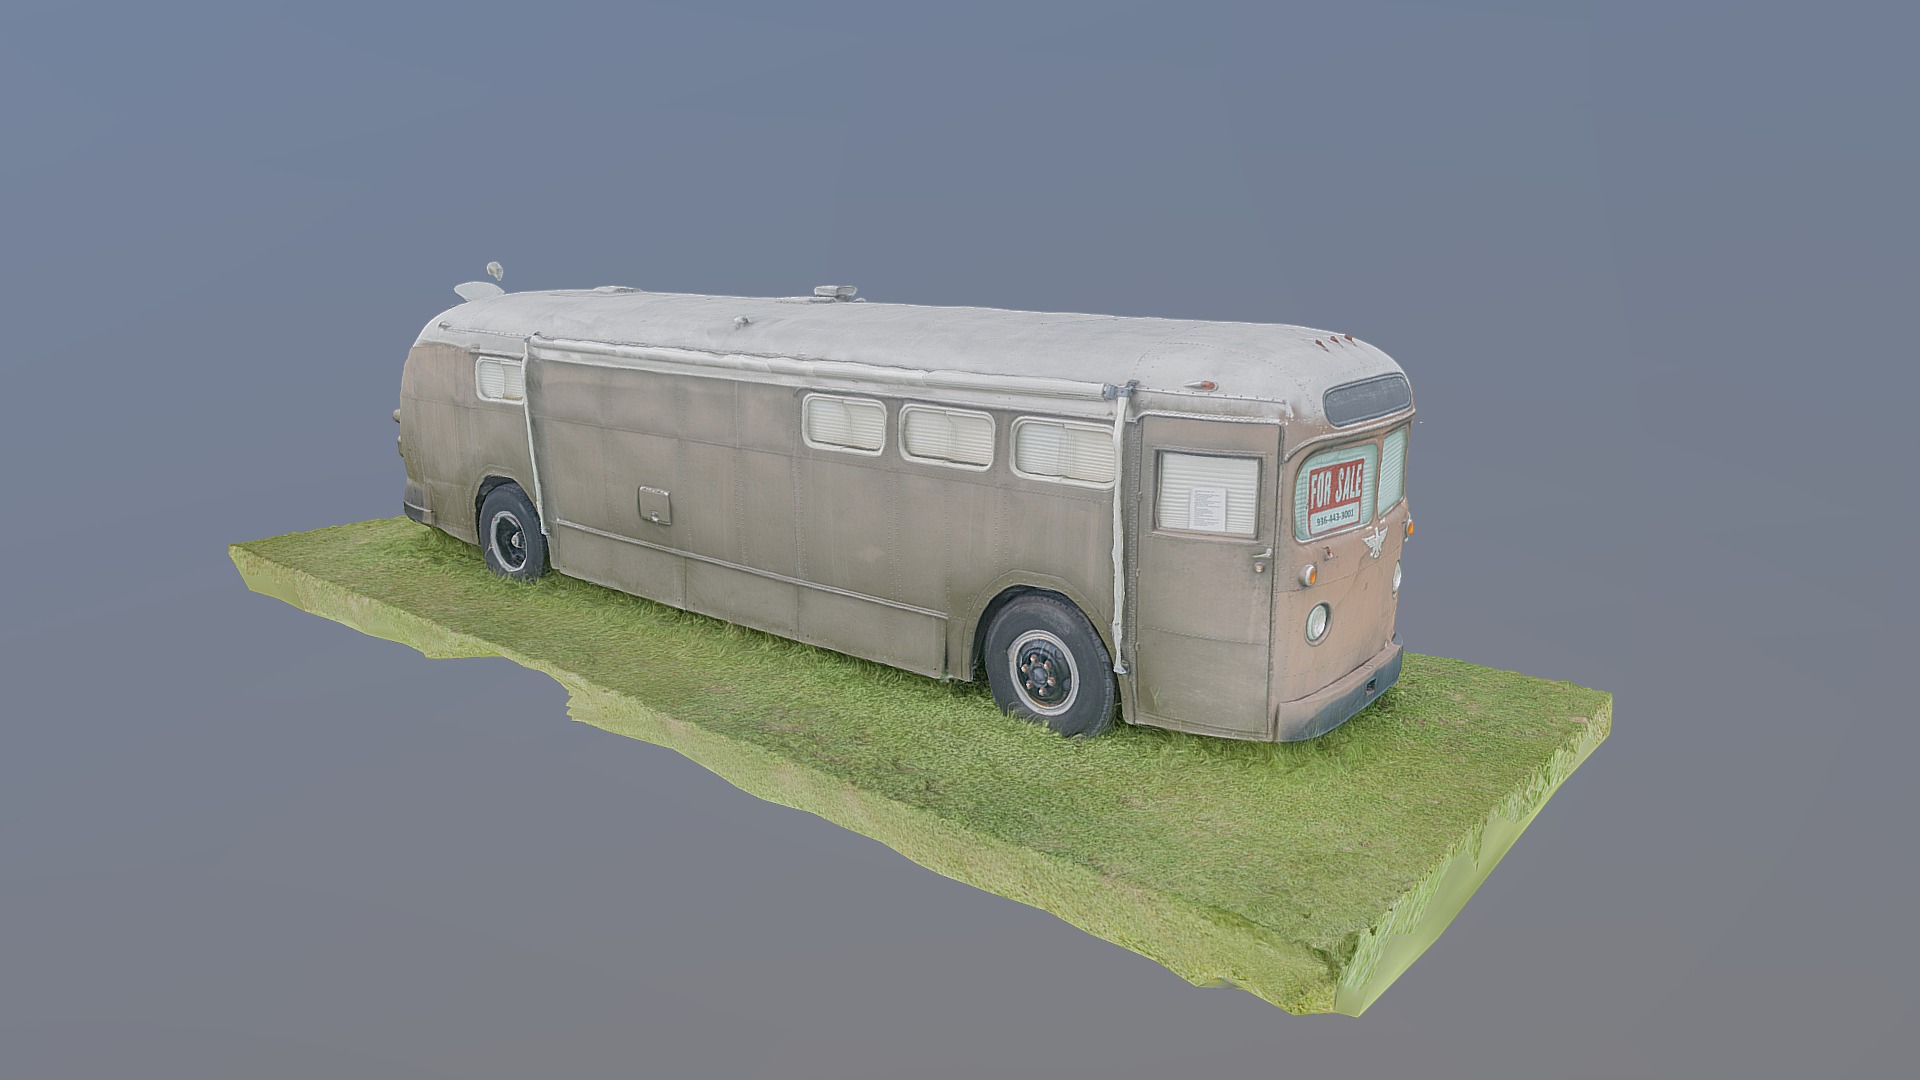 3D model eagle RV bus (photogrammetry) - This is a 3D model of the eagle RV bus (photogrammetry). The 3D model is about a model of a bus.